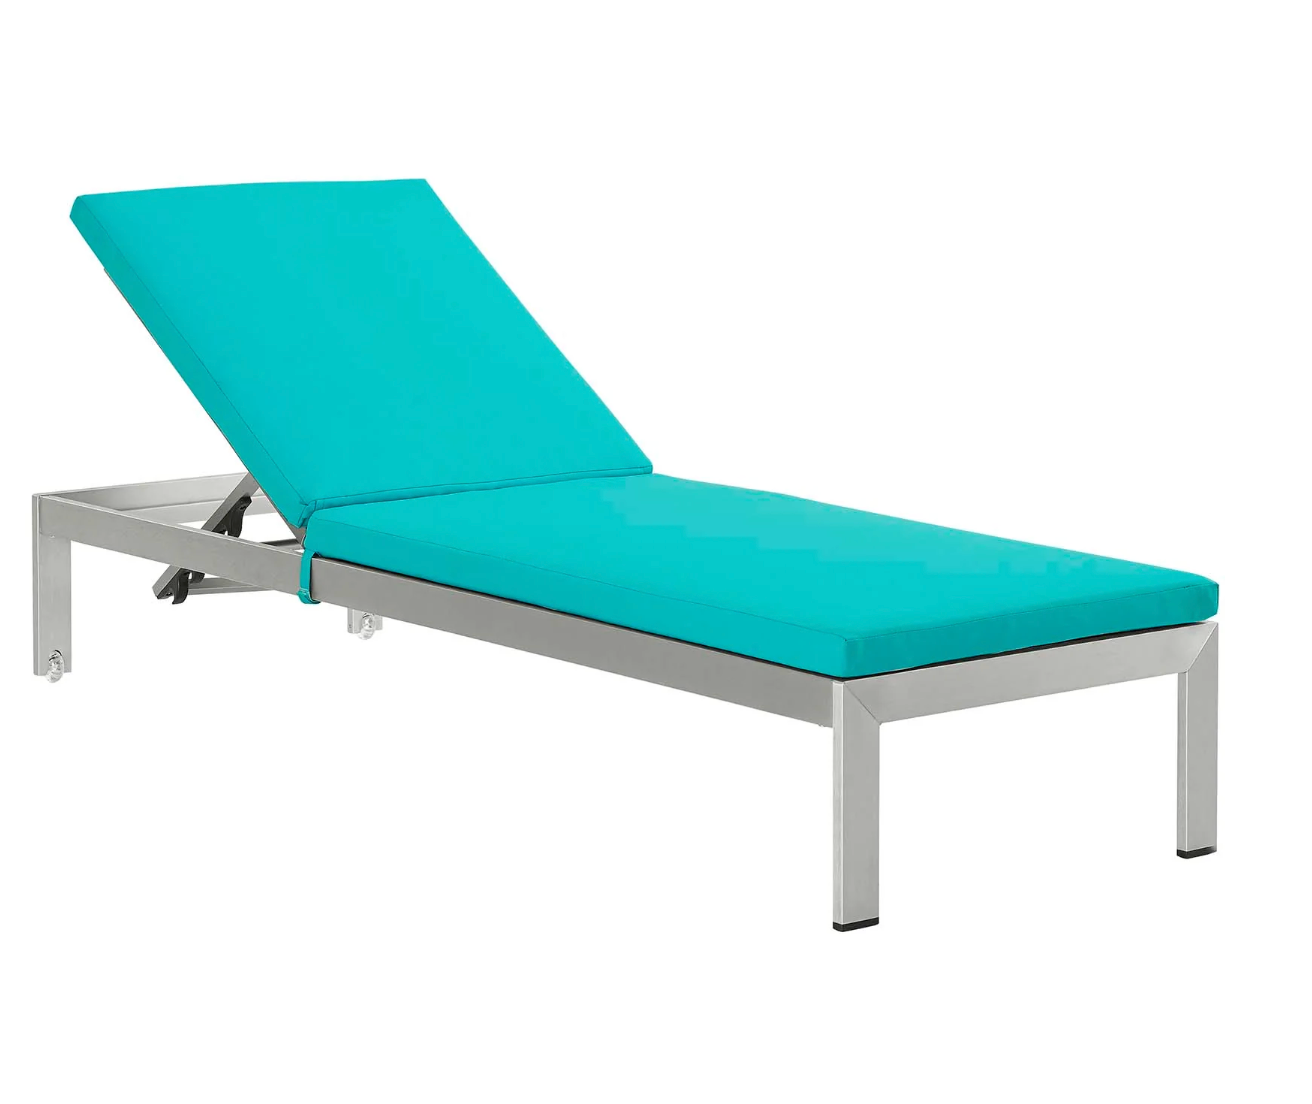 Silver Aluminum Outdoor Chaise with Turquoise Cushion